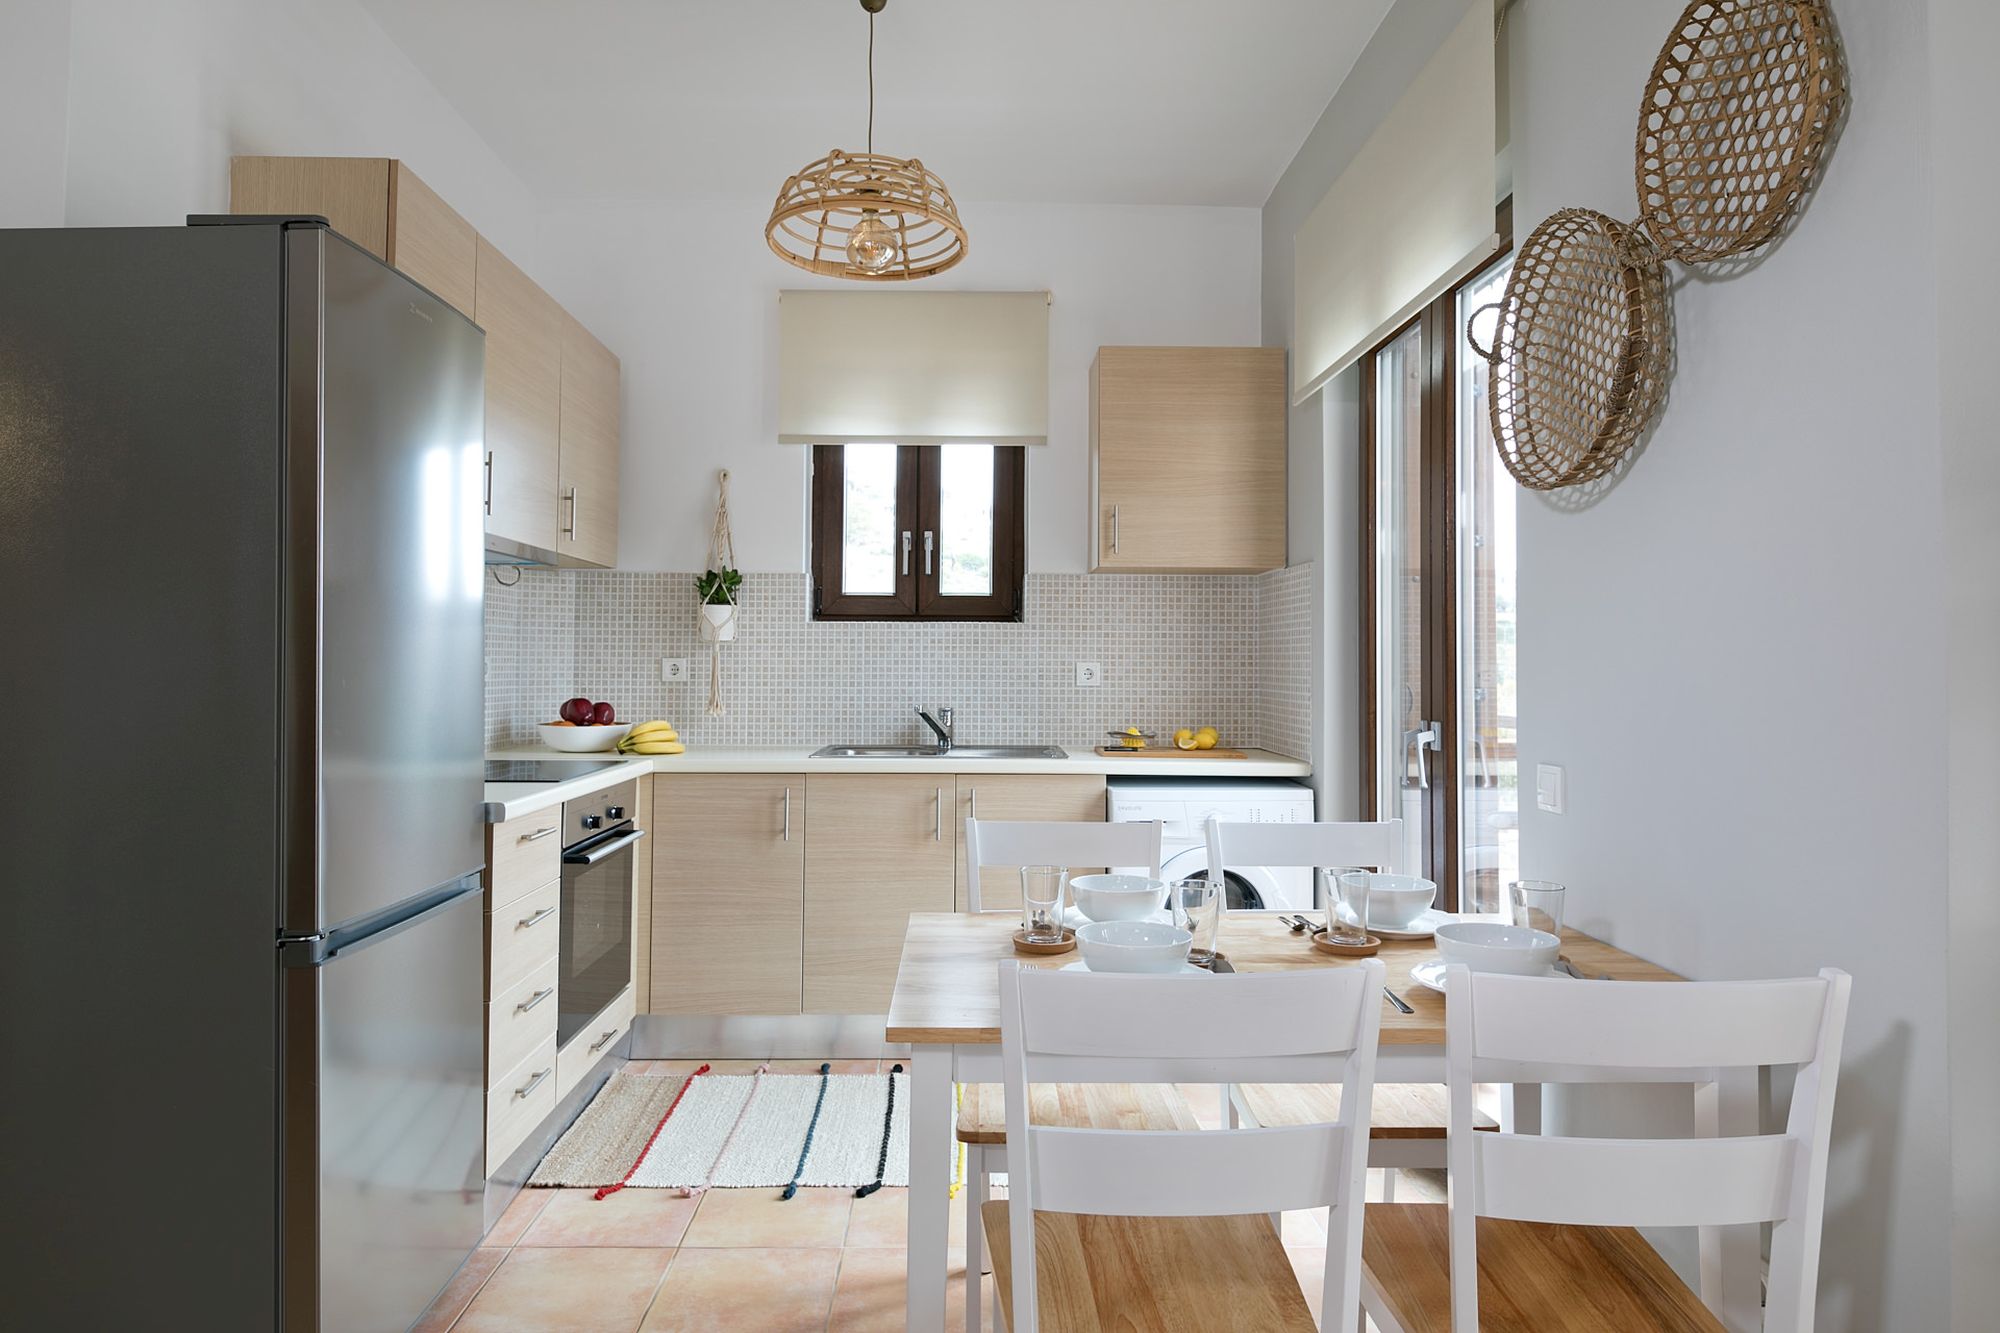 A modern kitchen with beige cabinets, a big inox fridge, an electric cooker oven and a wooden dining table.